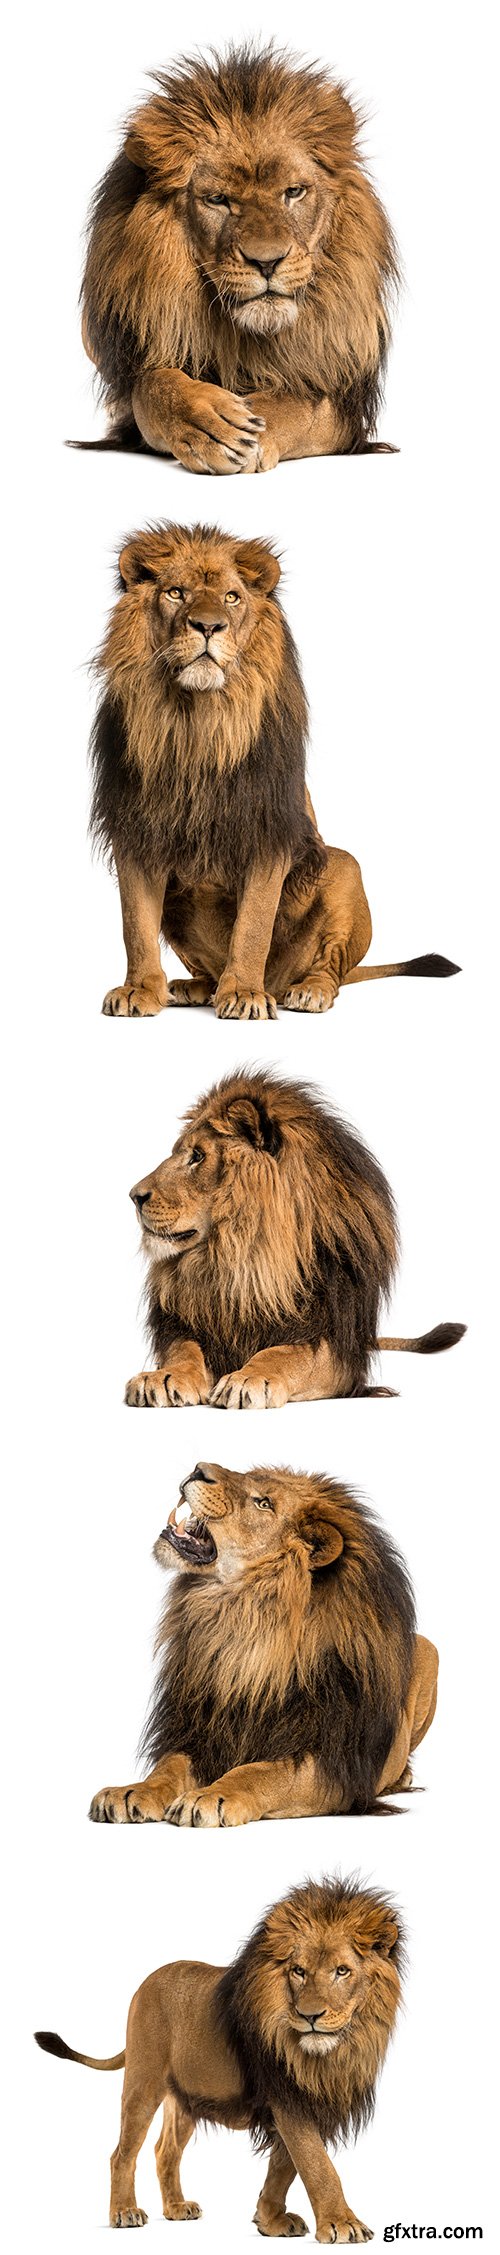 Lion Isolated - 15xJPGs